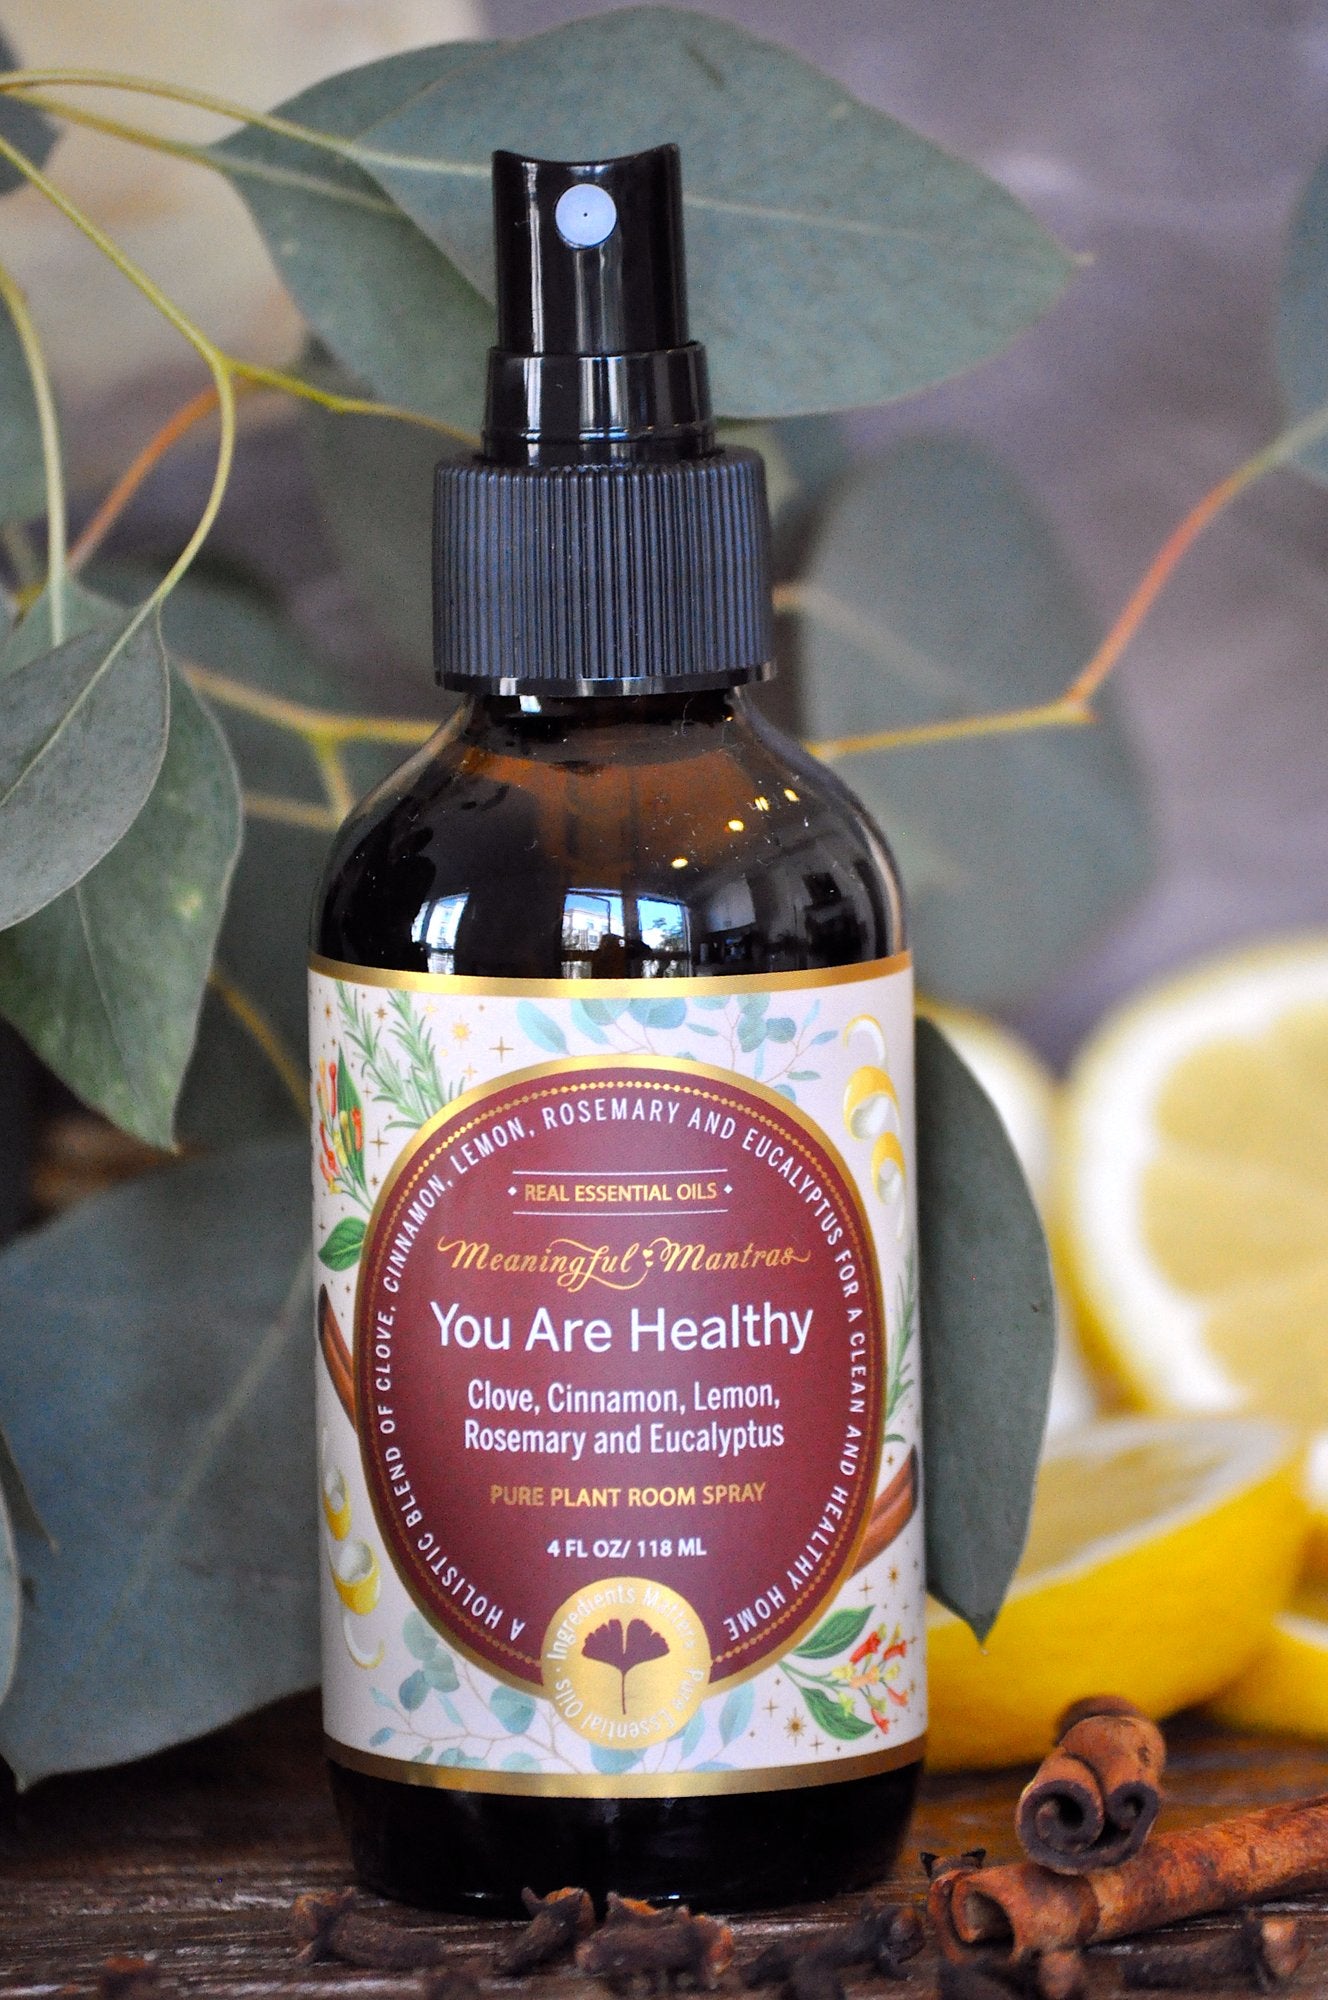 You Are Healthy Pure Plant Room Spray